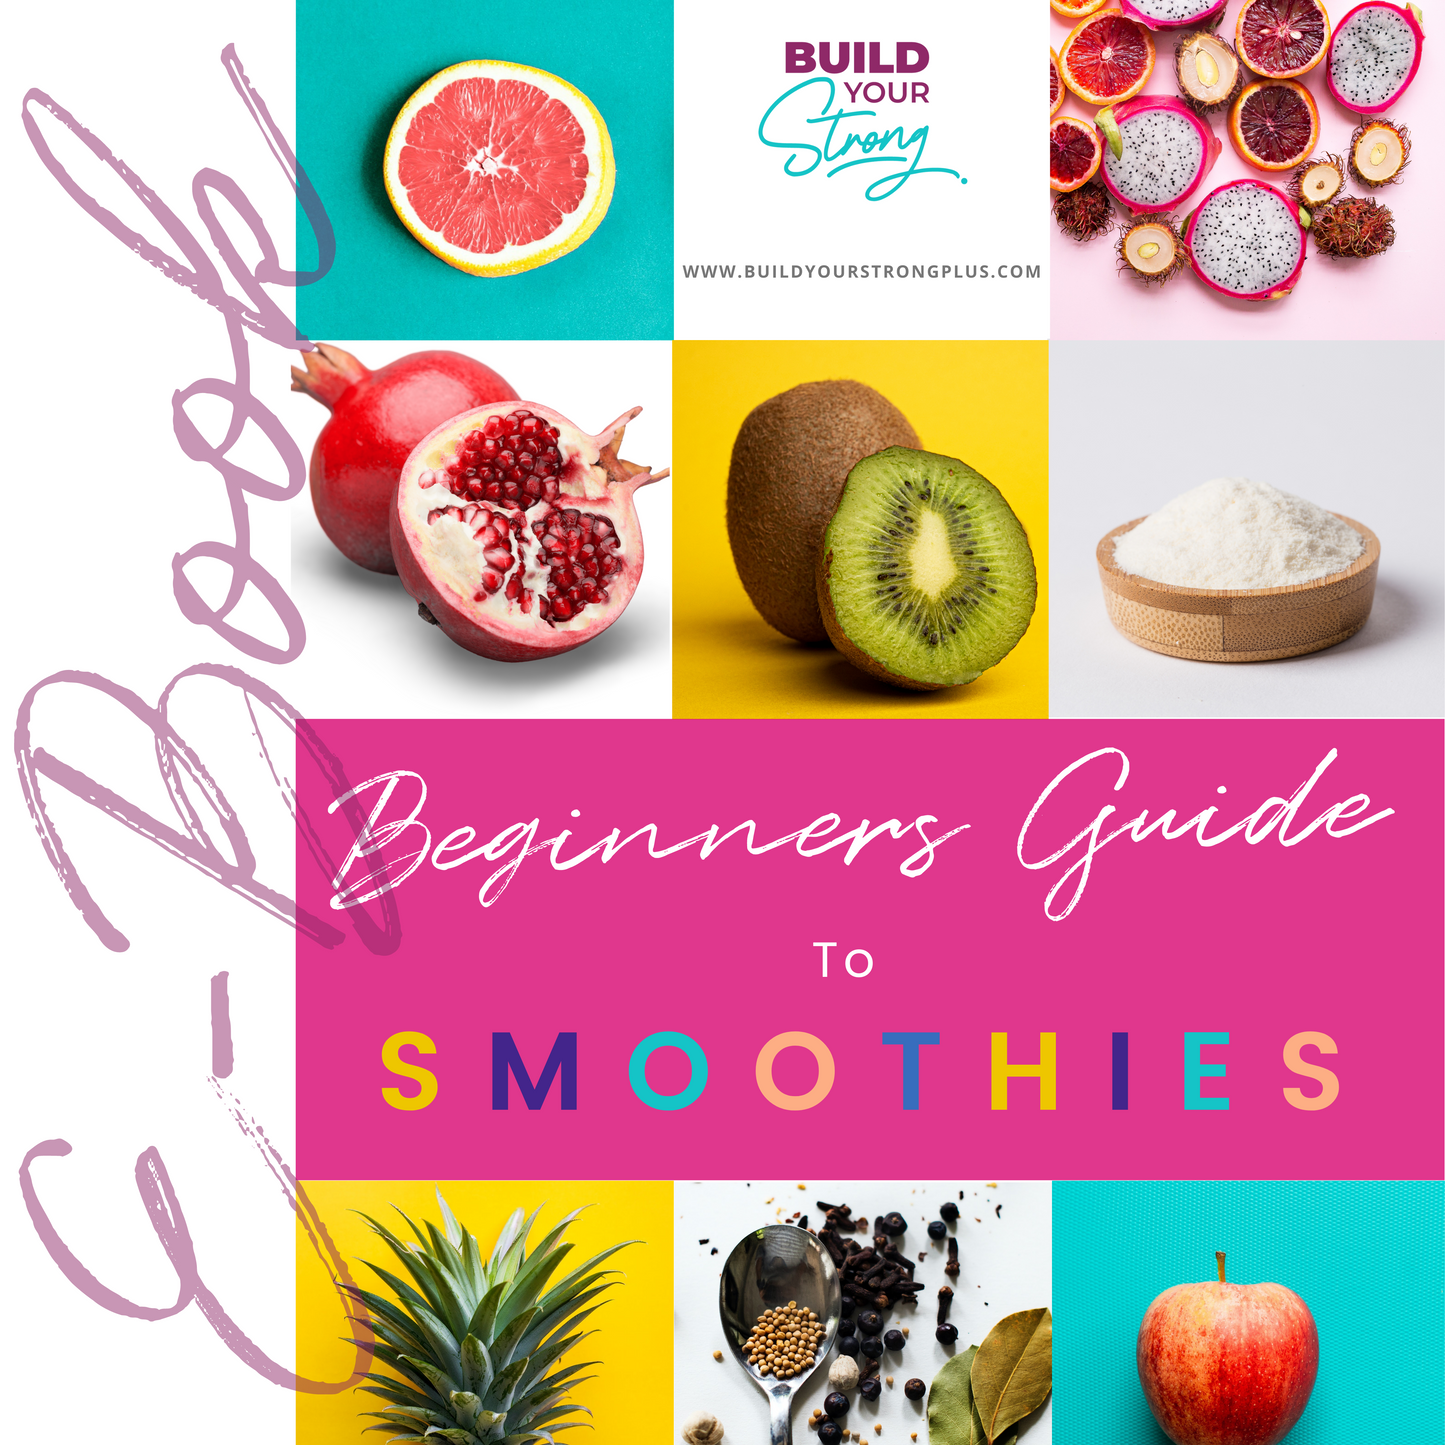 Beginners Guide To Smoothies